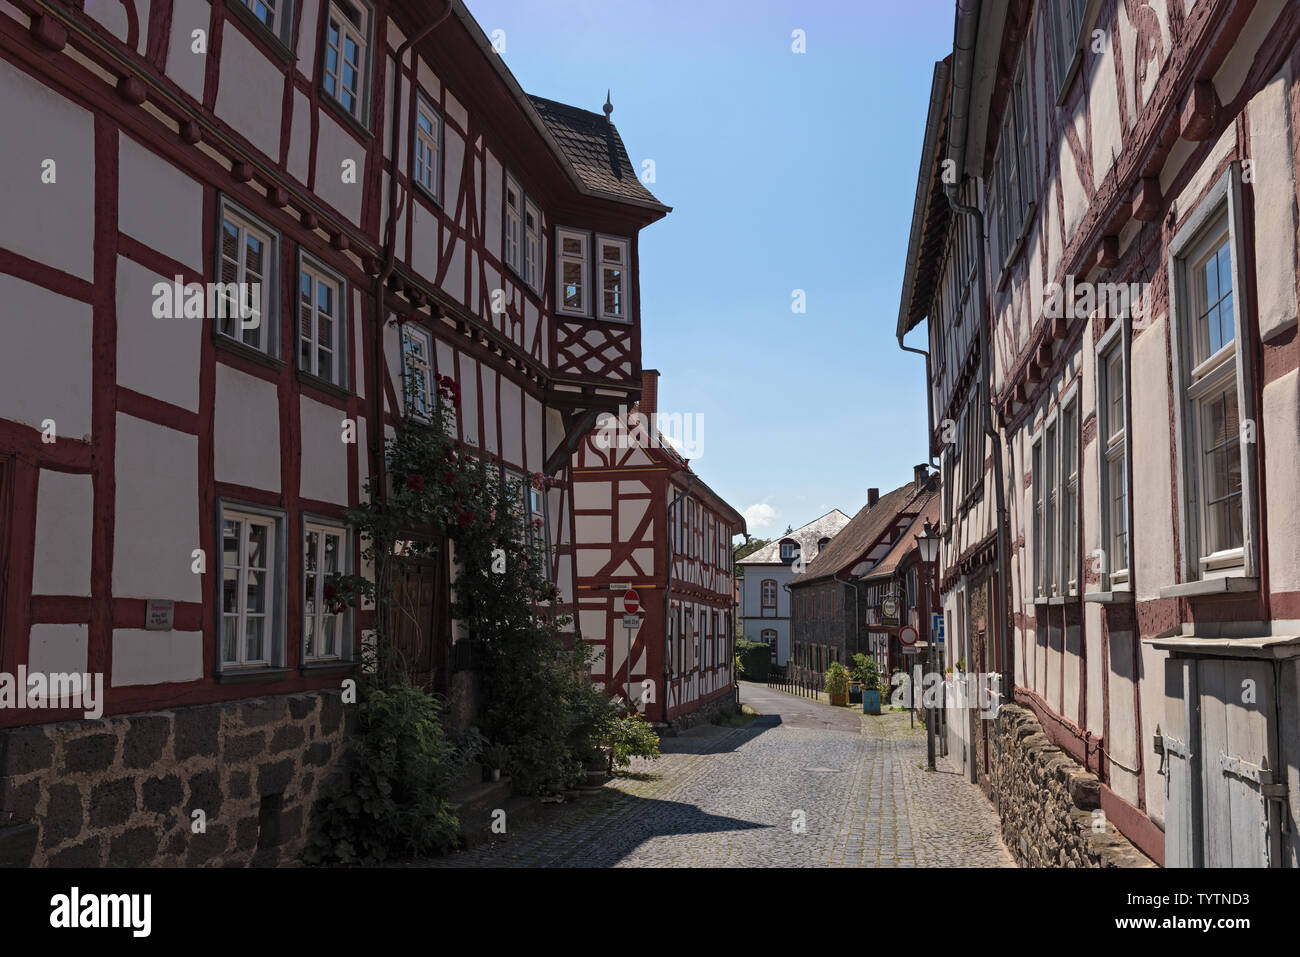 small street with half timbered houses in lich hesse germany Stock Photo